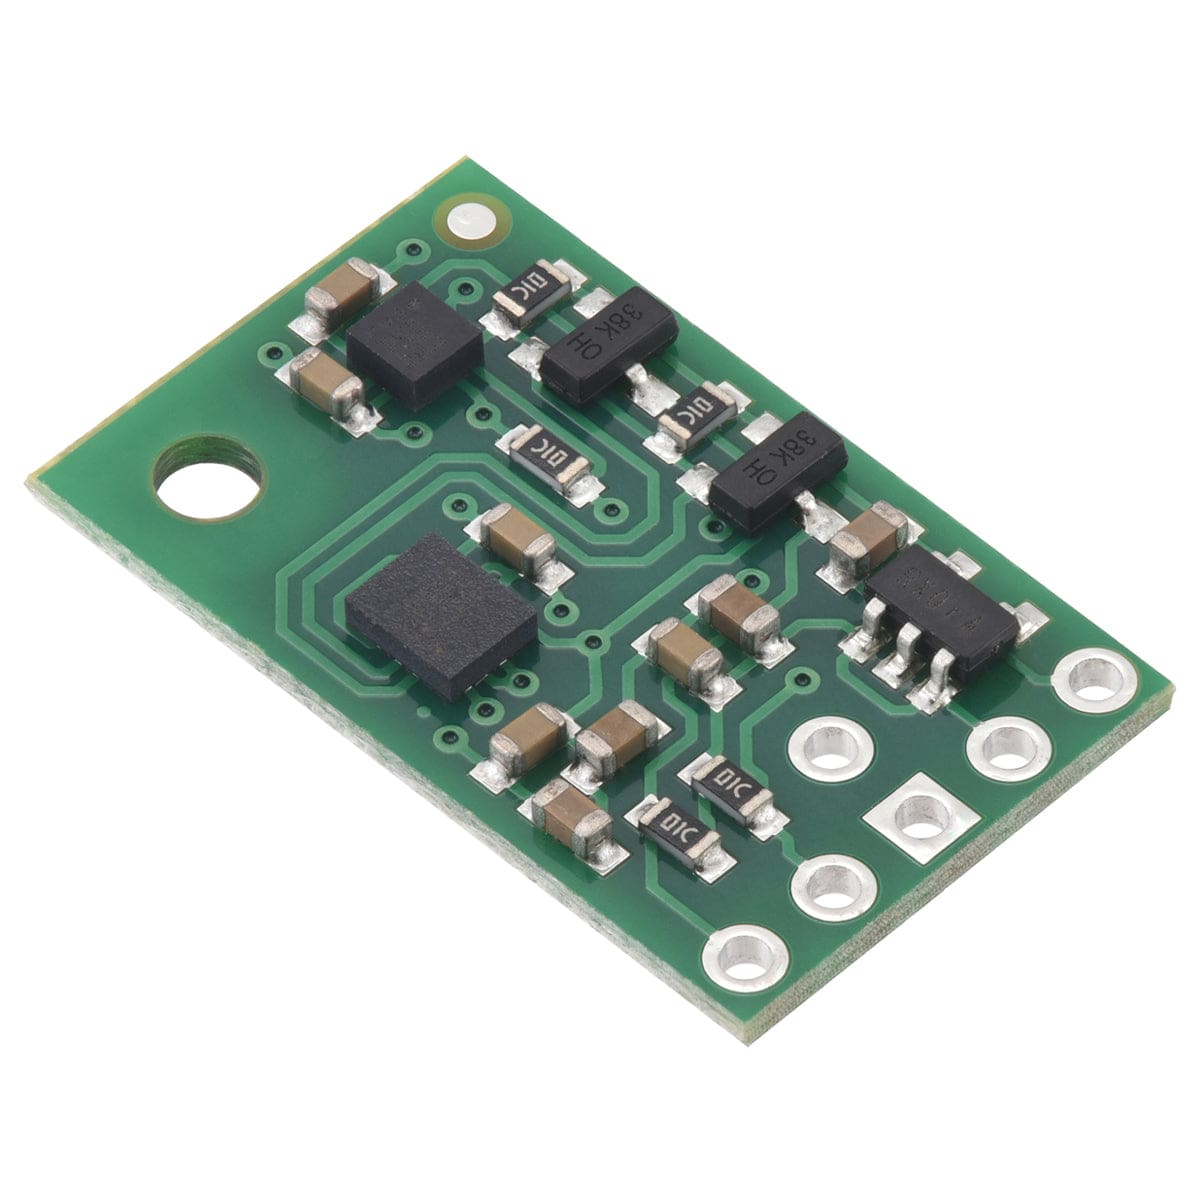 MinIMU-9 v6 Gyro, Accelerometer and Compass (LSM6DSO & LIS3MDL) - The Pi Hut